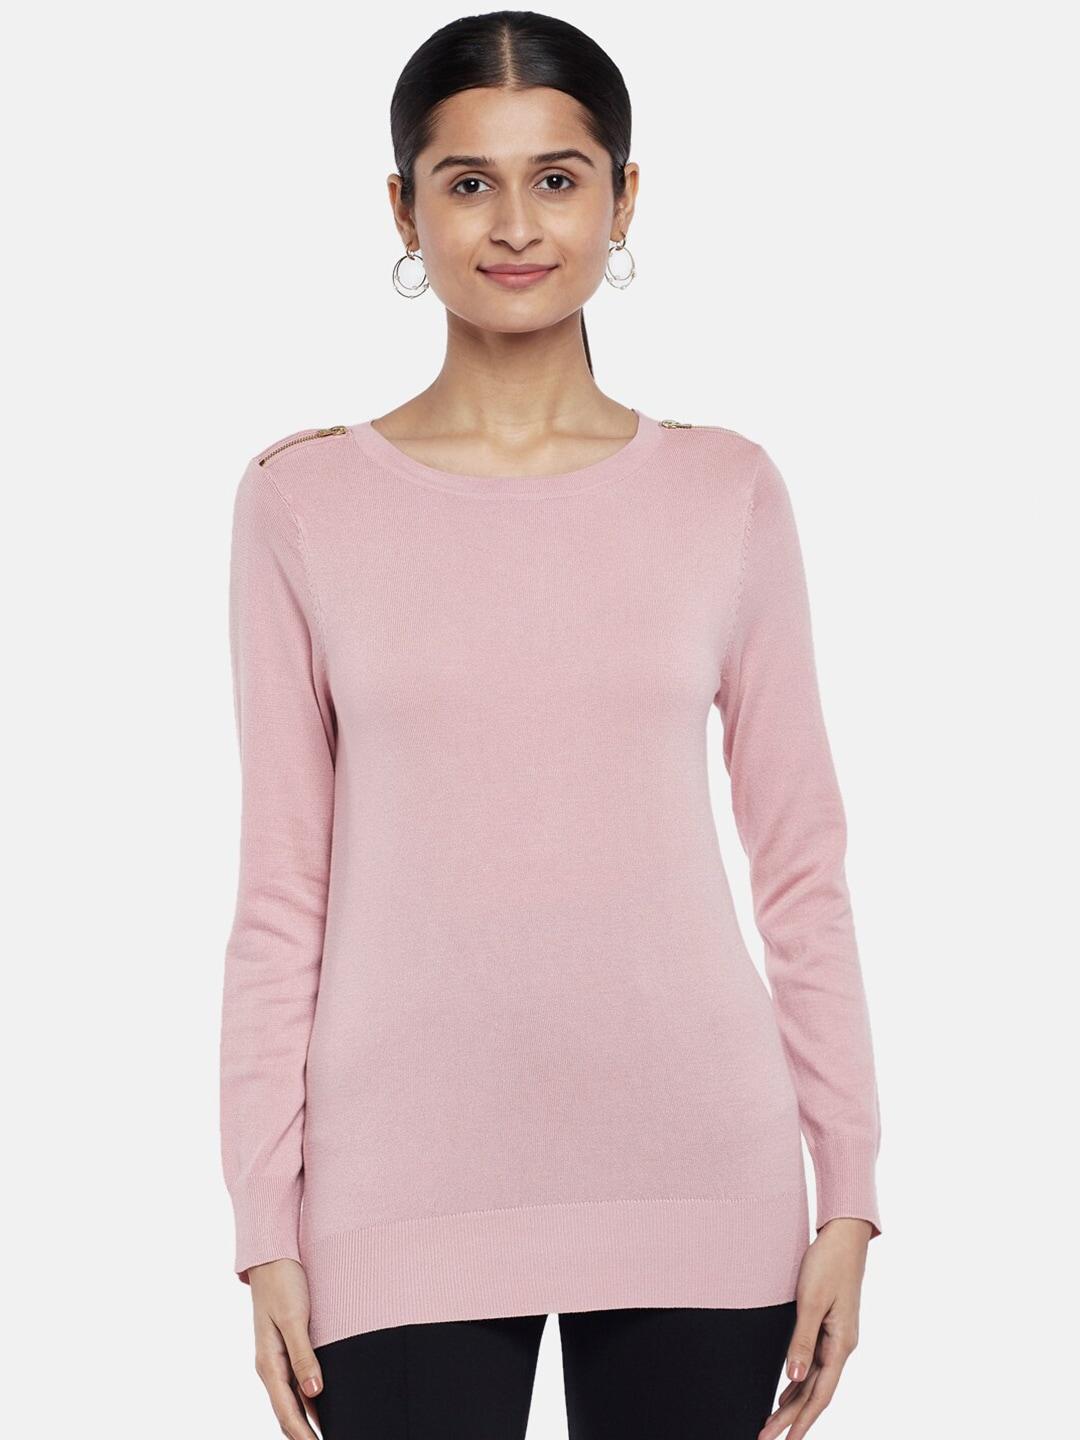 annabelle-by-pantaloons-women-pink-long-sleeves-solid-top